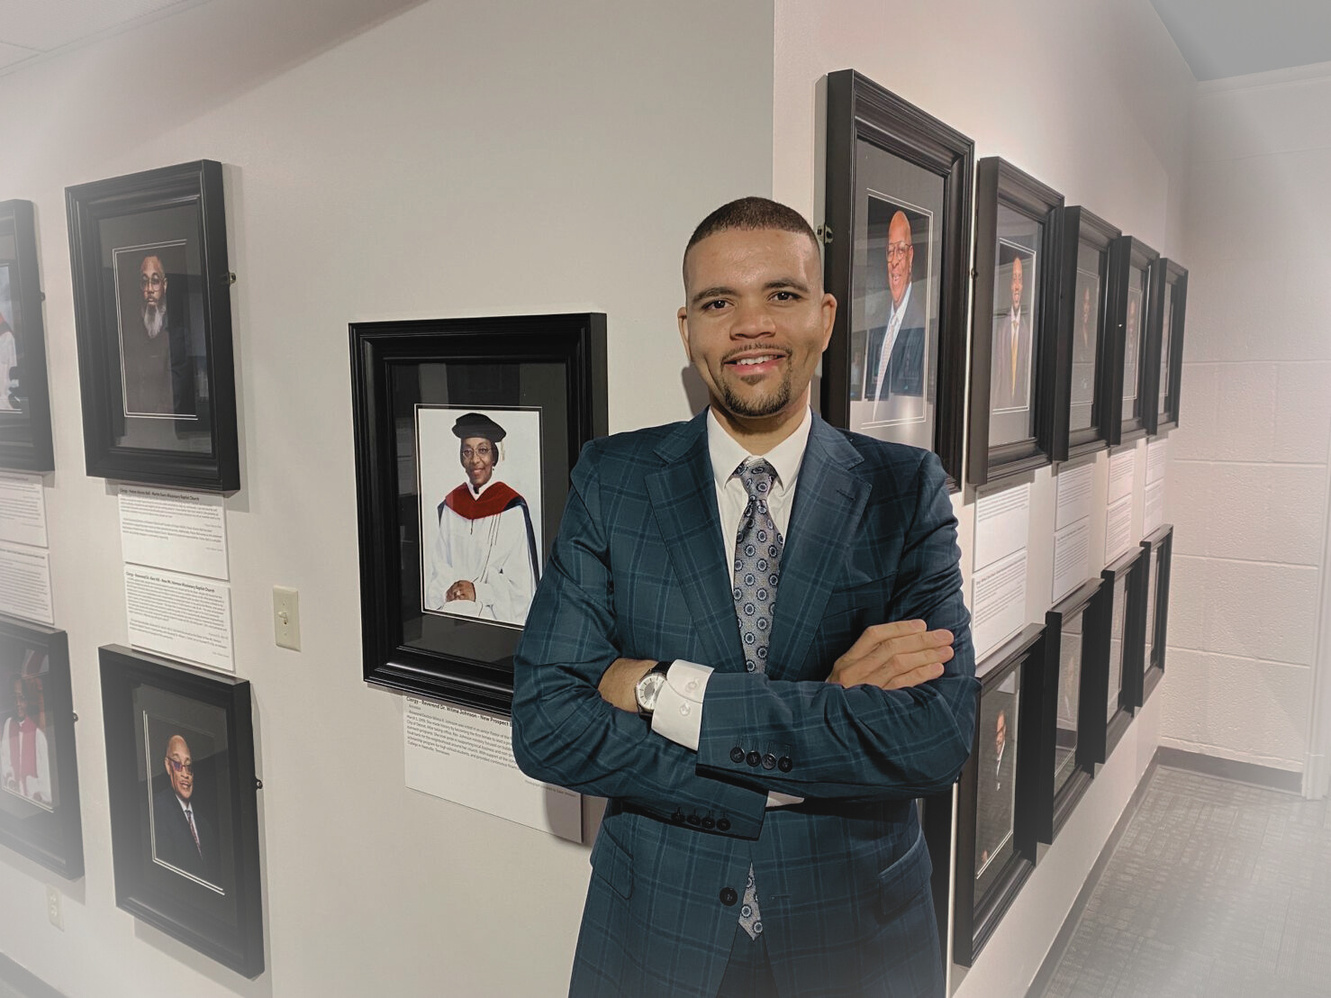 Collin Foster Mays is a trusted public administrator who most recently served as Director of Economic Inclusion for Cincinnati, Community and Economic Development Director
for Delta Township and Economic Development Director for Centerline